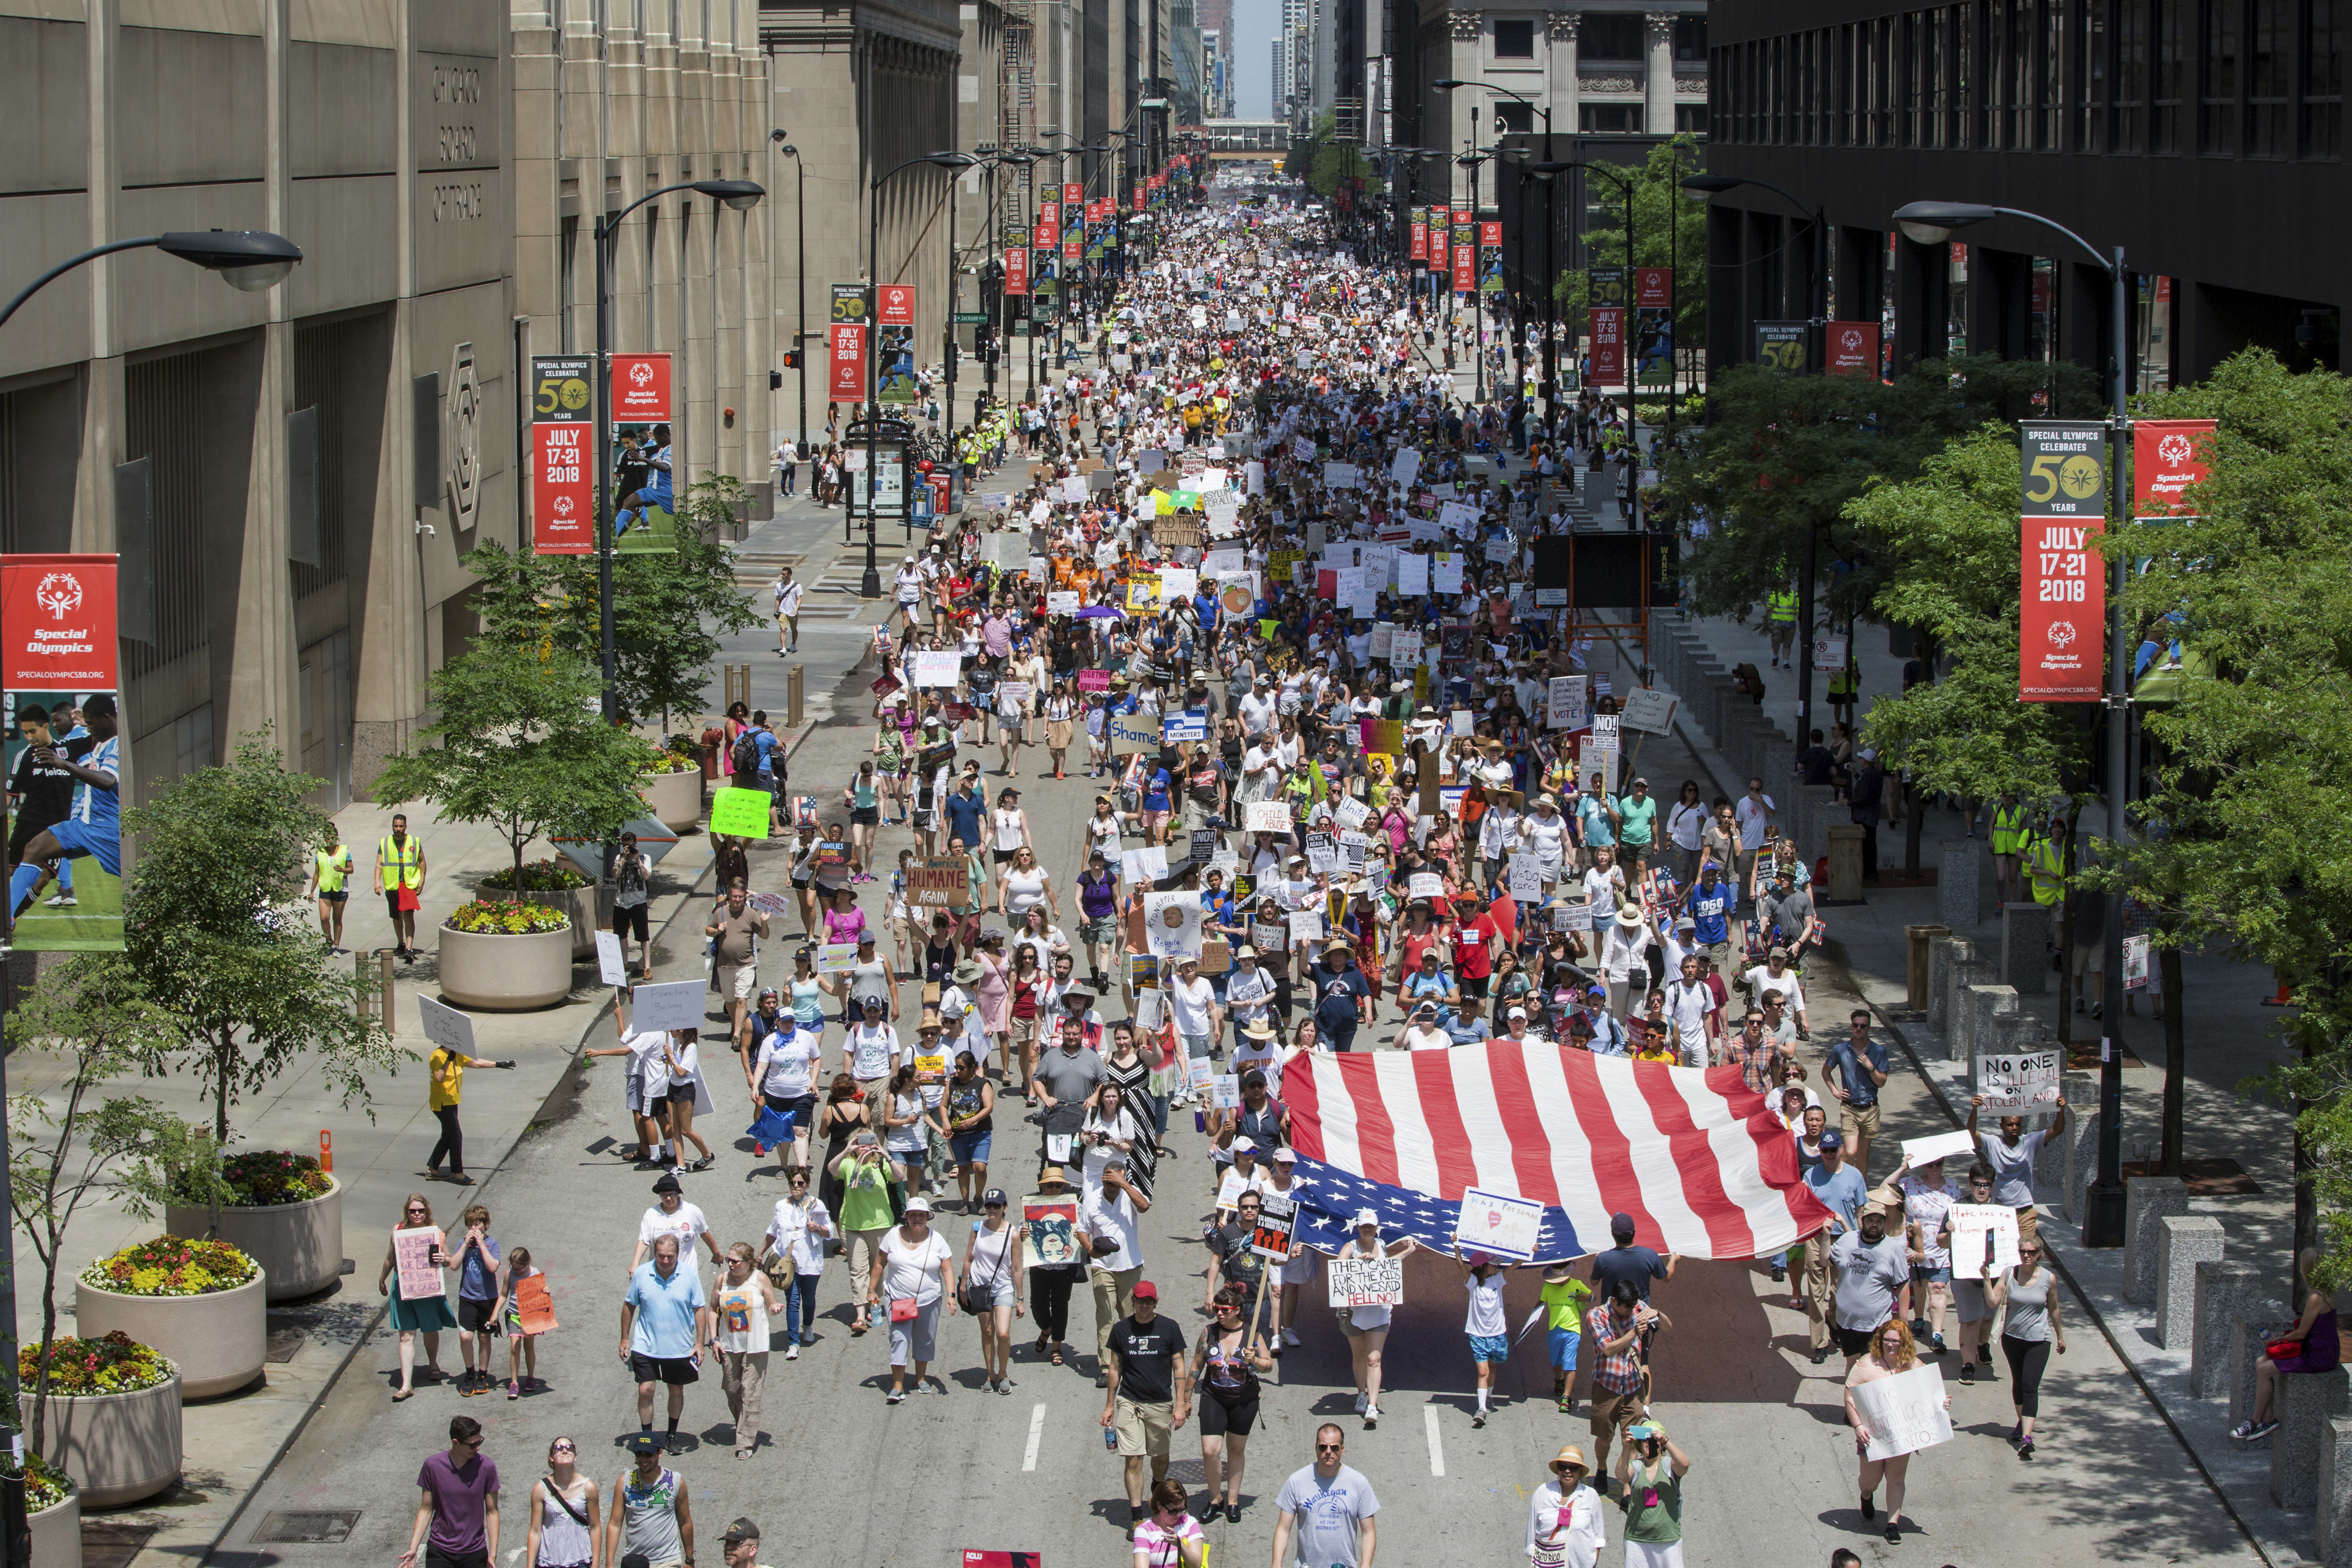 People participate in the Families Belong Together march in Chicago on Saturday, June 30, 2018. In major cities and tiny towns, marchers gathered across America, moved by accounts of children separated from their parents at the U.S.-Mexico border, in the latest act of mass resistance against President Donald Trump's immigration policies. (James Foster/Chicago Sun-Times via AP)